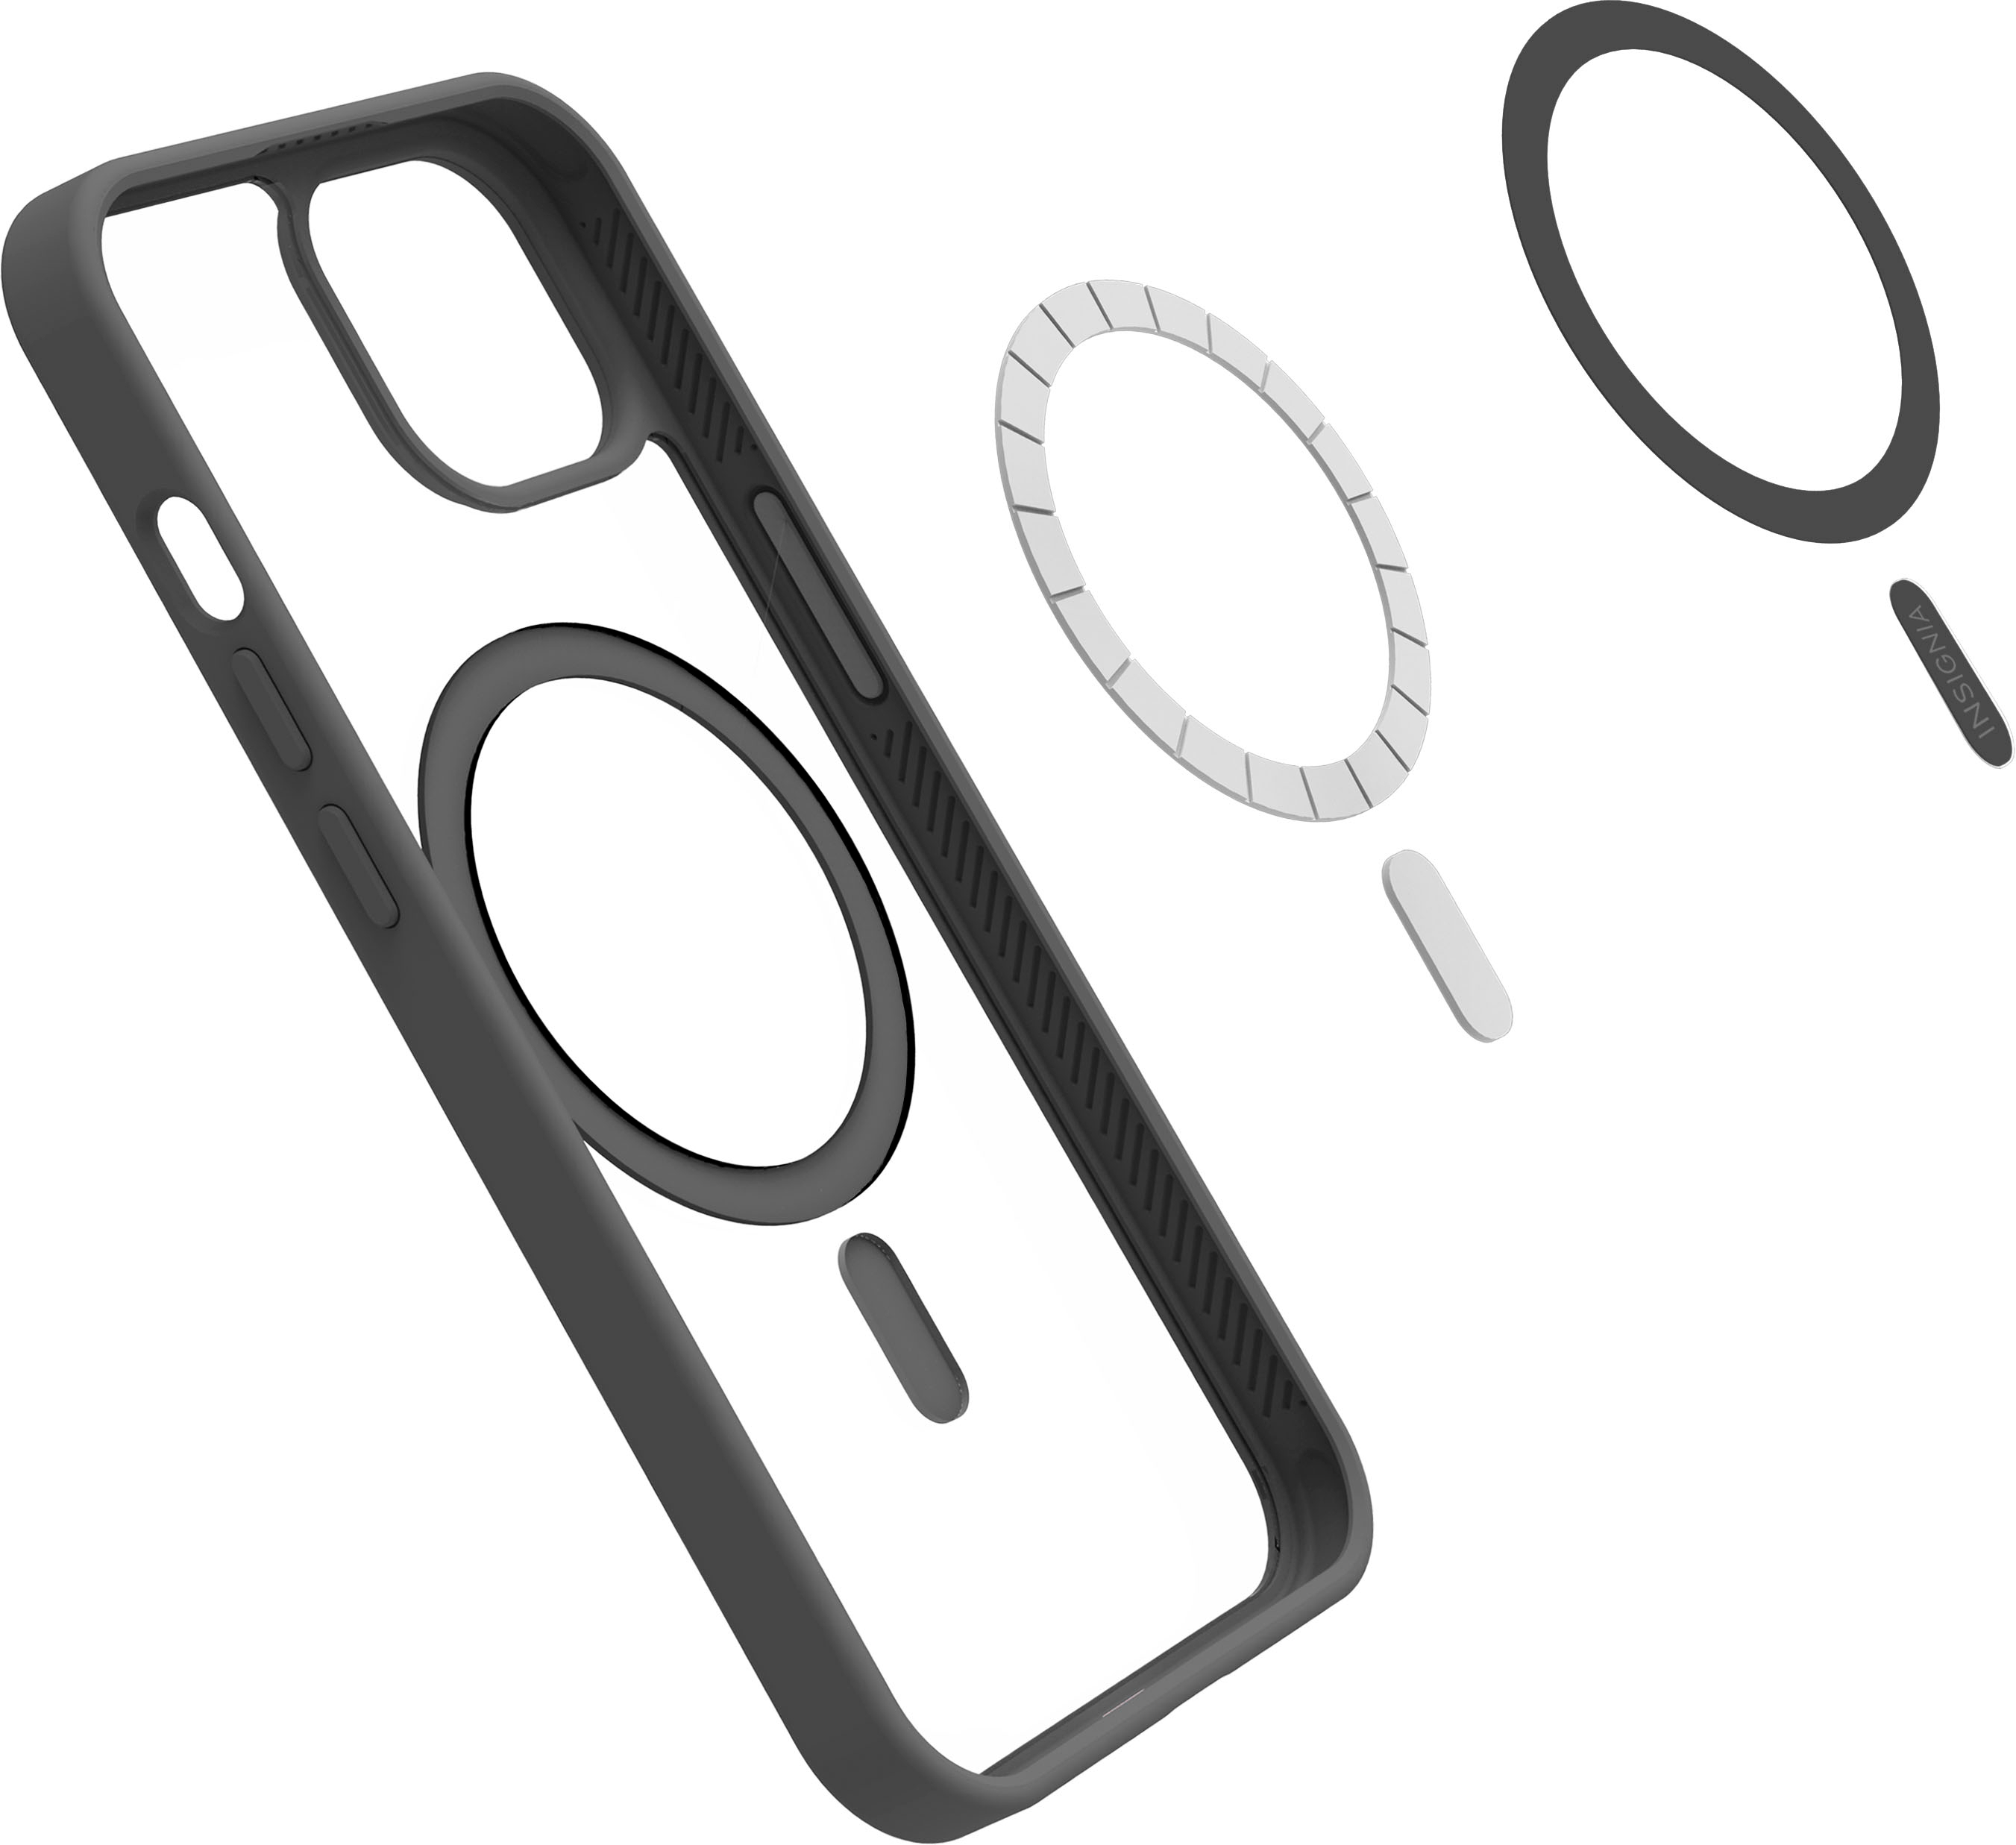 Insignia™ Hard-Shell Case with MagSafe for iPhone 14 and iPhone 13  Clear/Black NS-14MSHCB - Best Buy